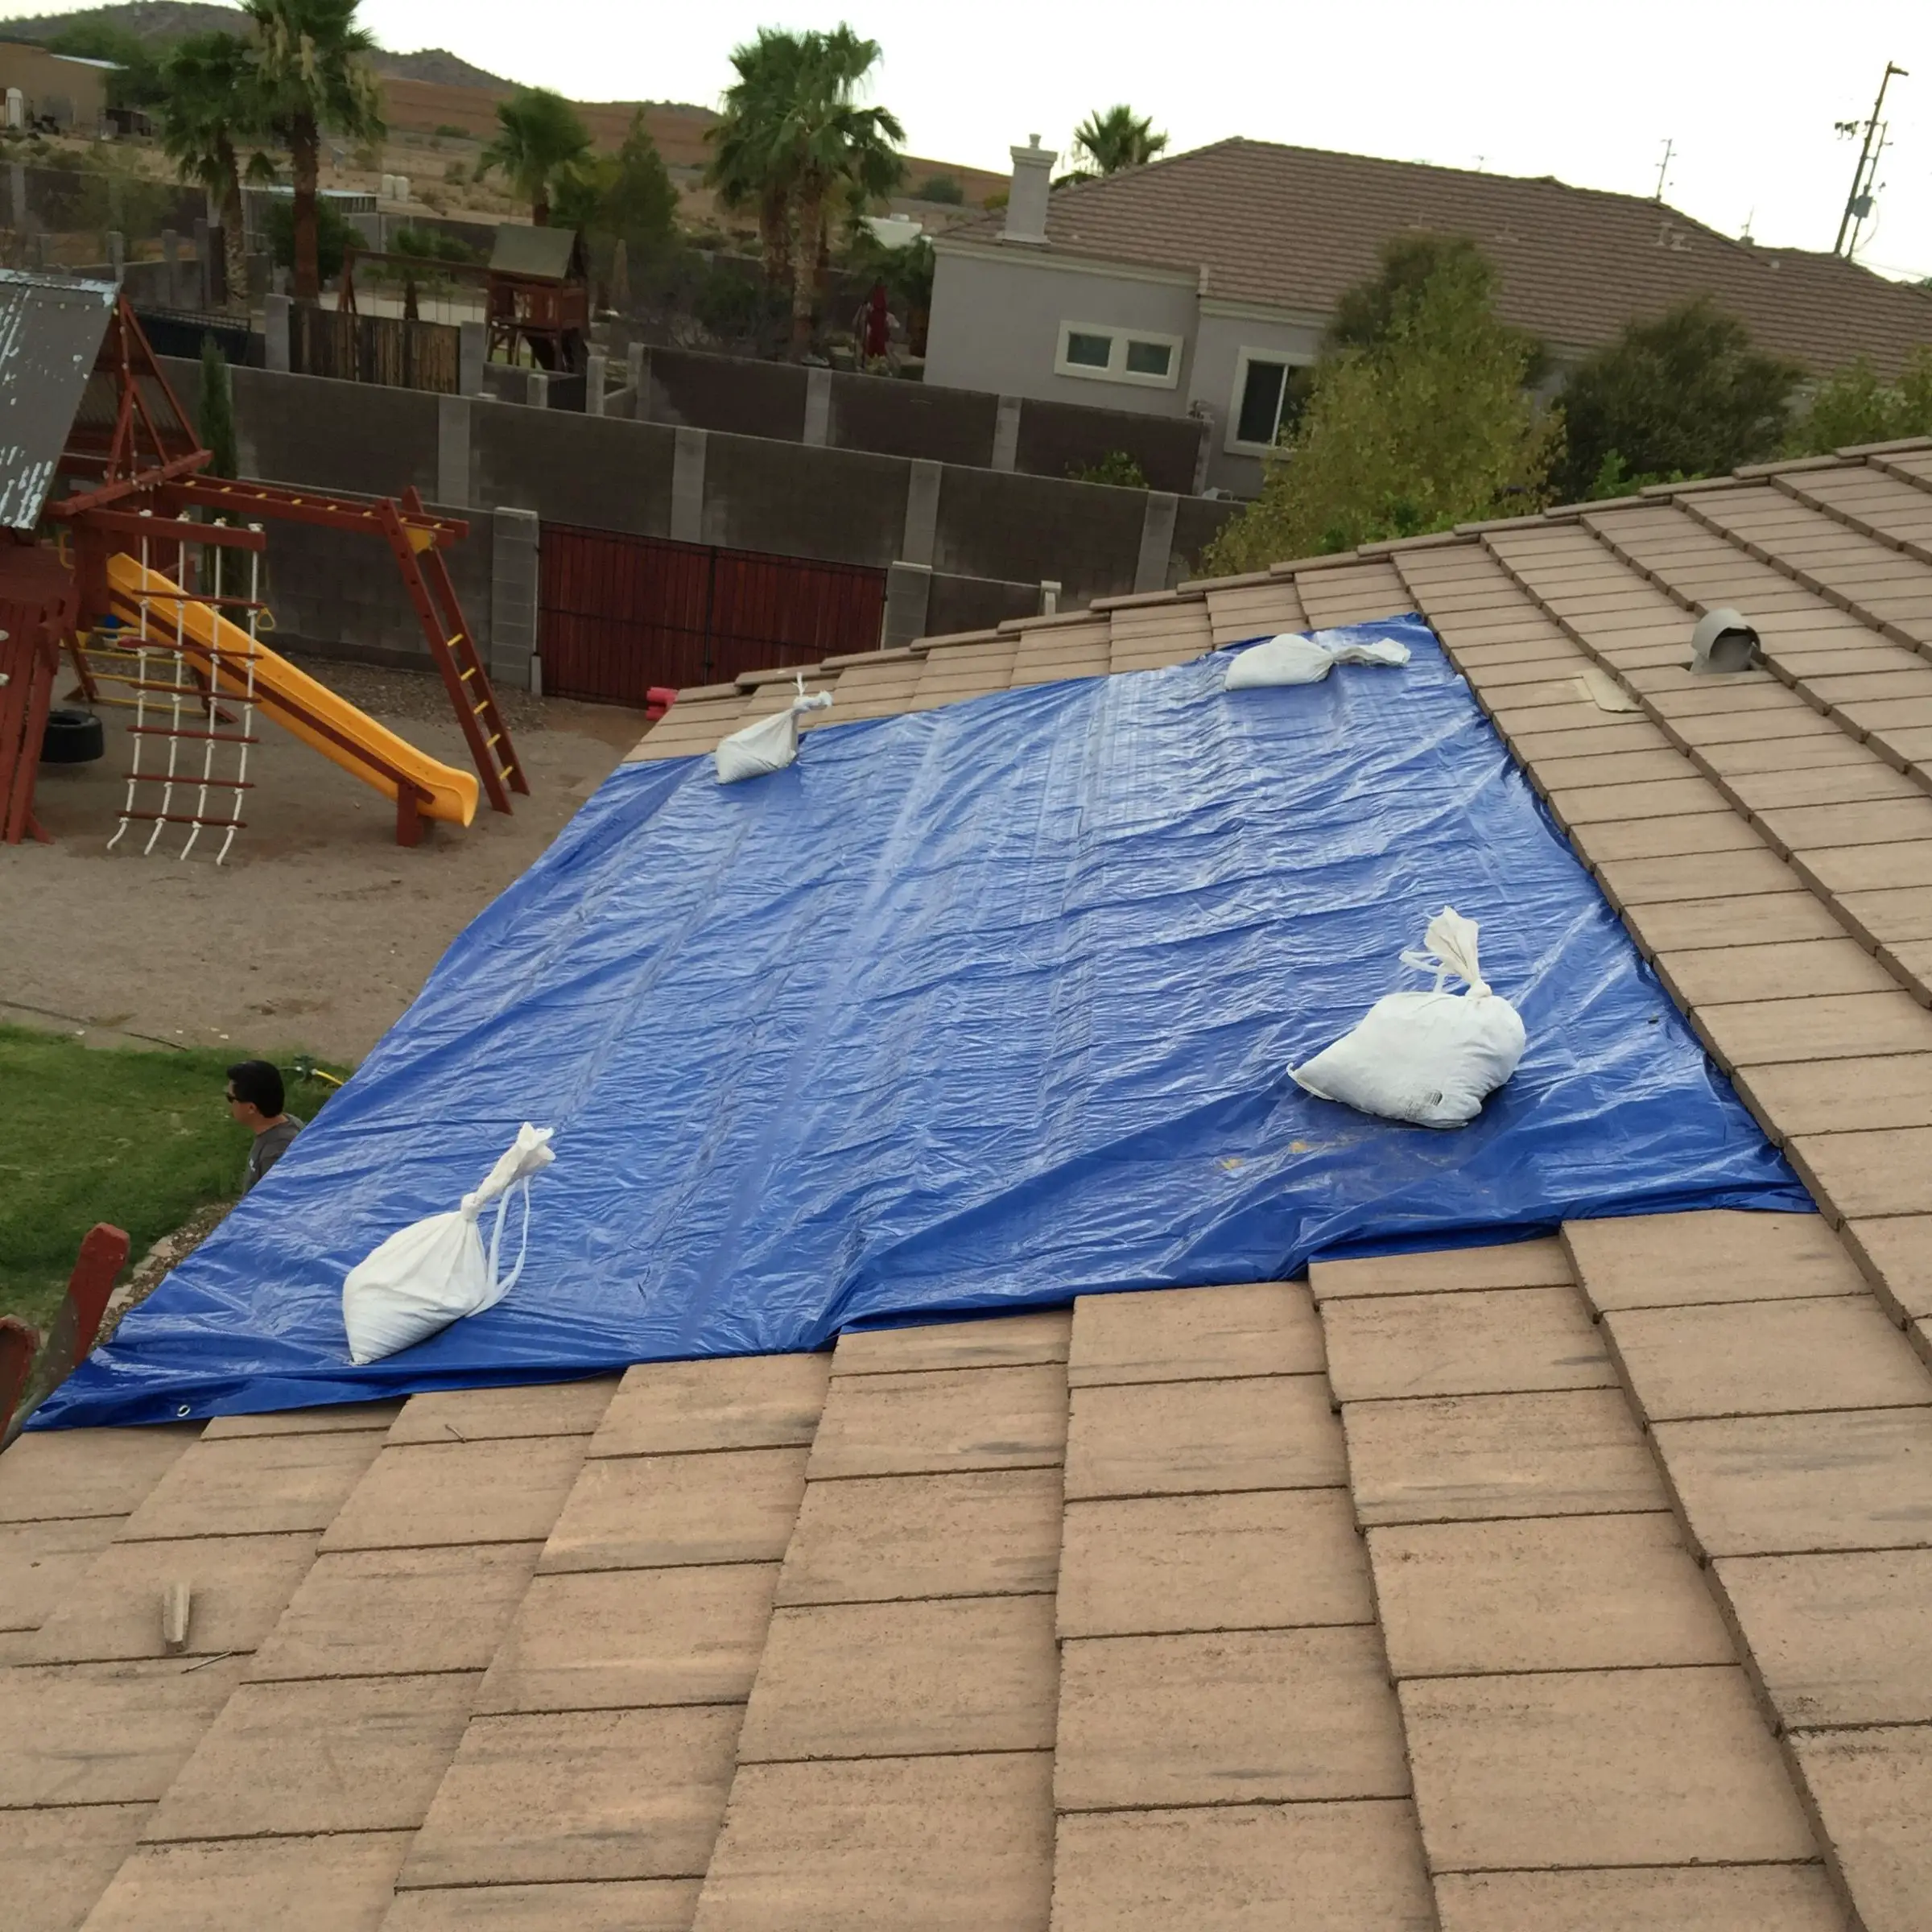 How To Patch A Roof Leak With Tarp